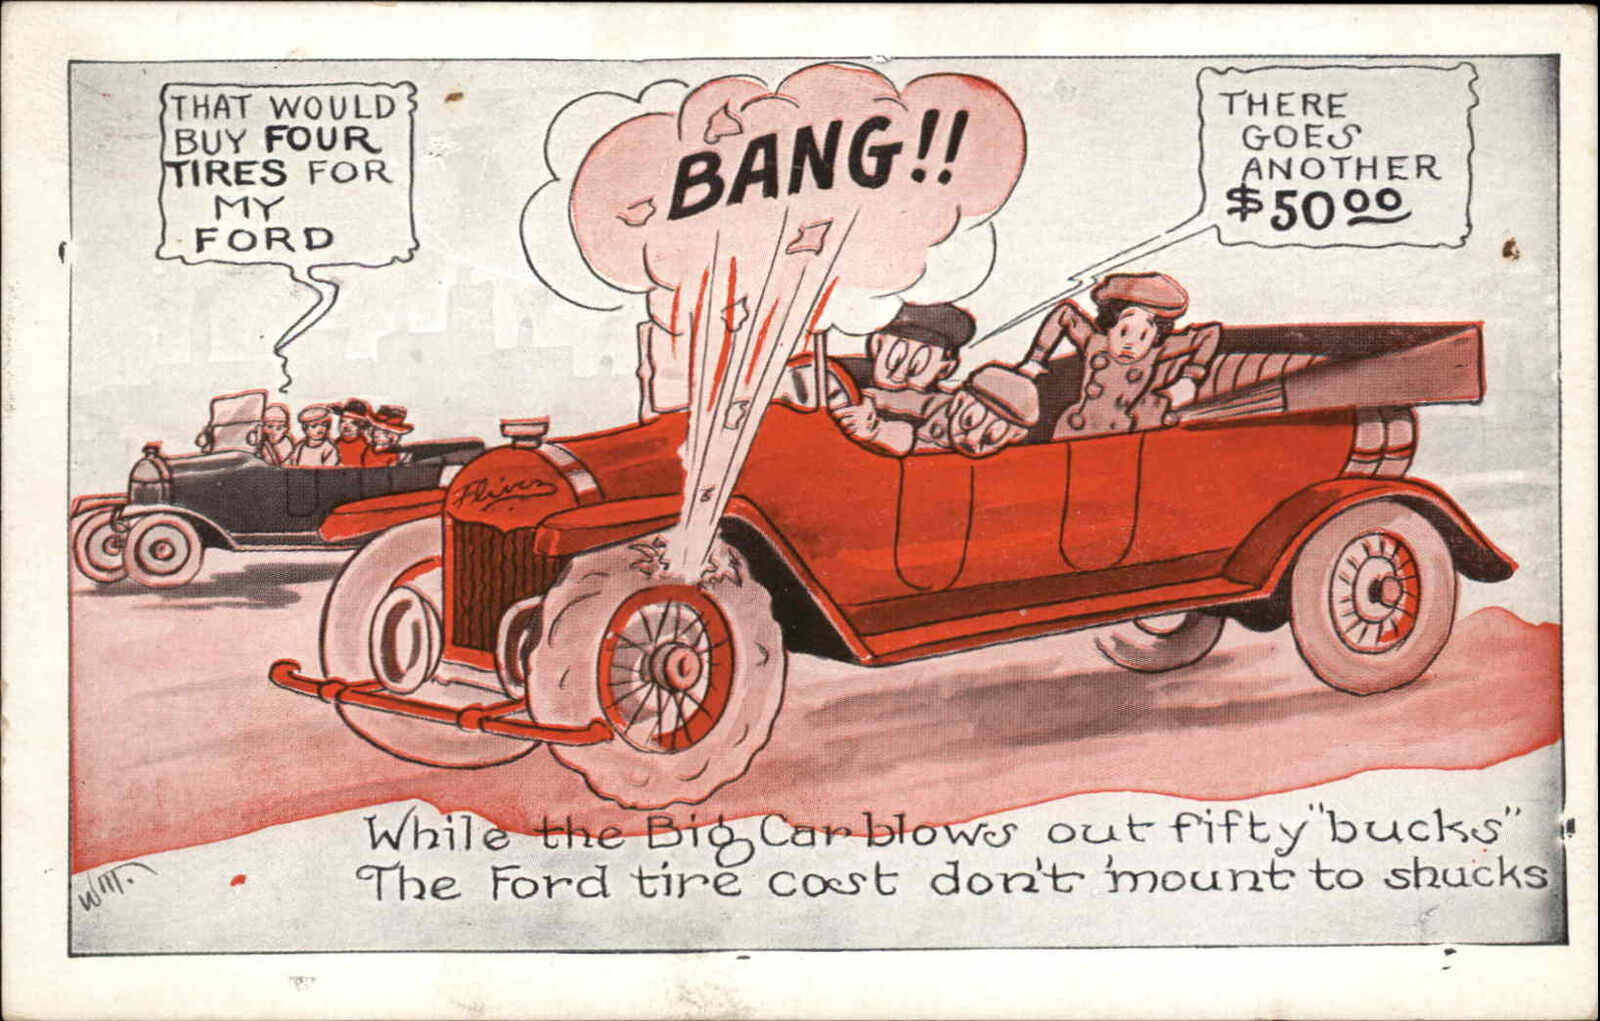 A/S Ford Comic Classic Car Blowing Tire Accident Vintage Postcard